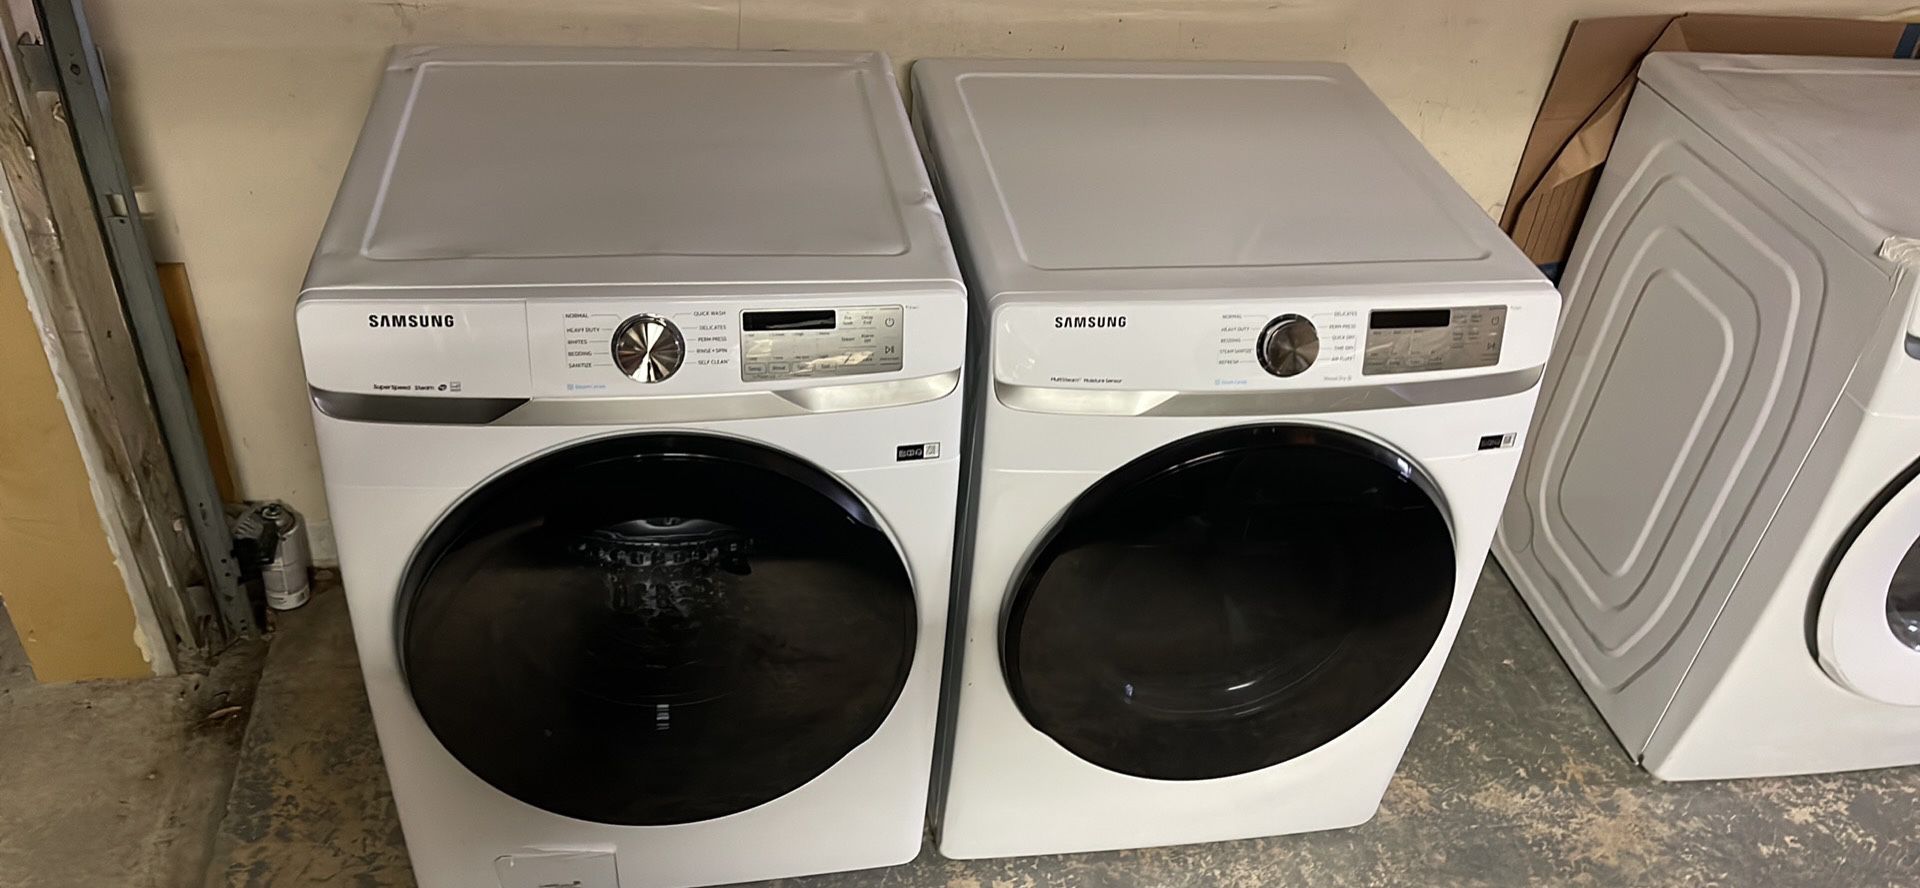 New Open Box Samsung Washer And Dryer 27” Scratch And Dents 